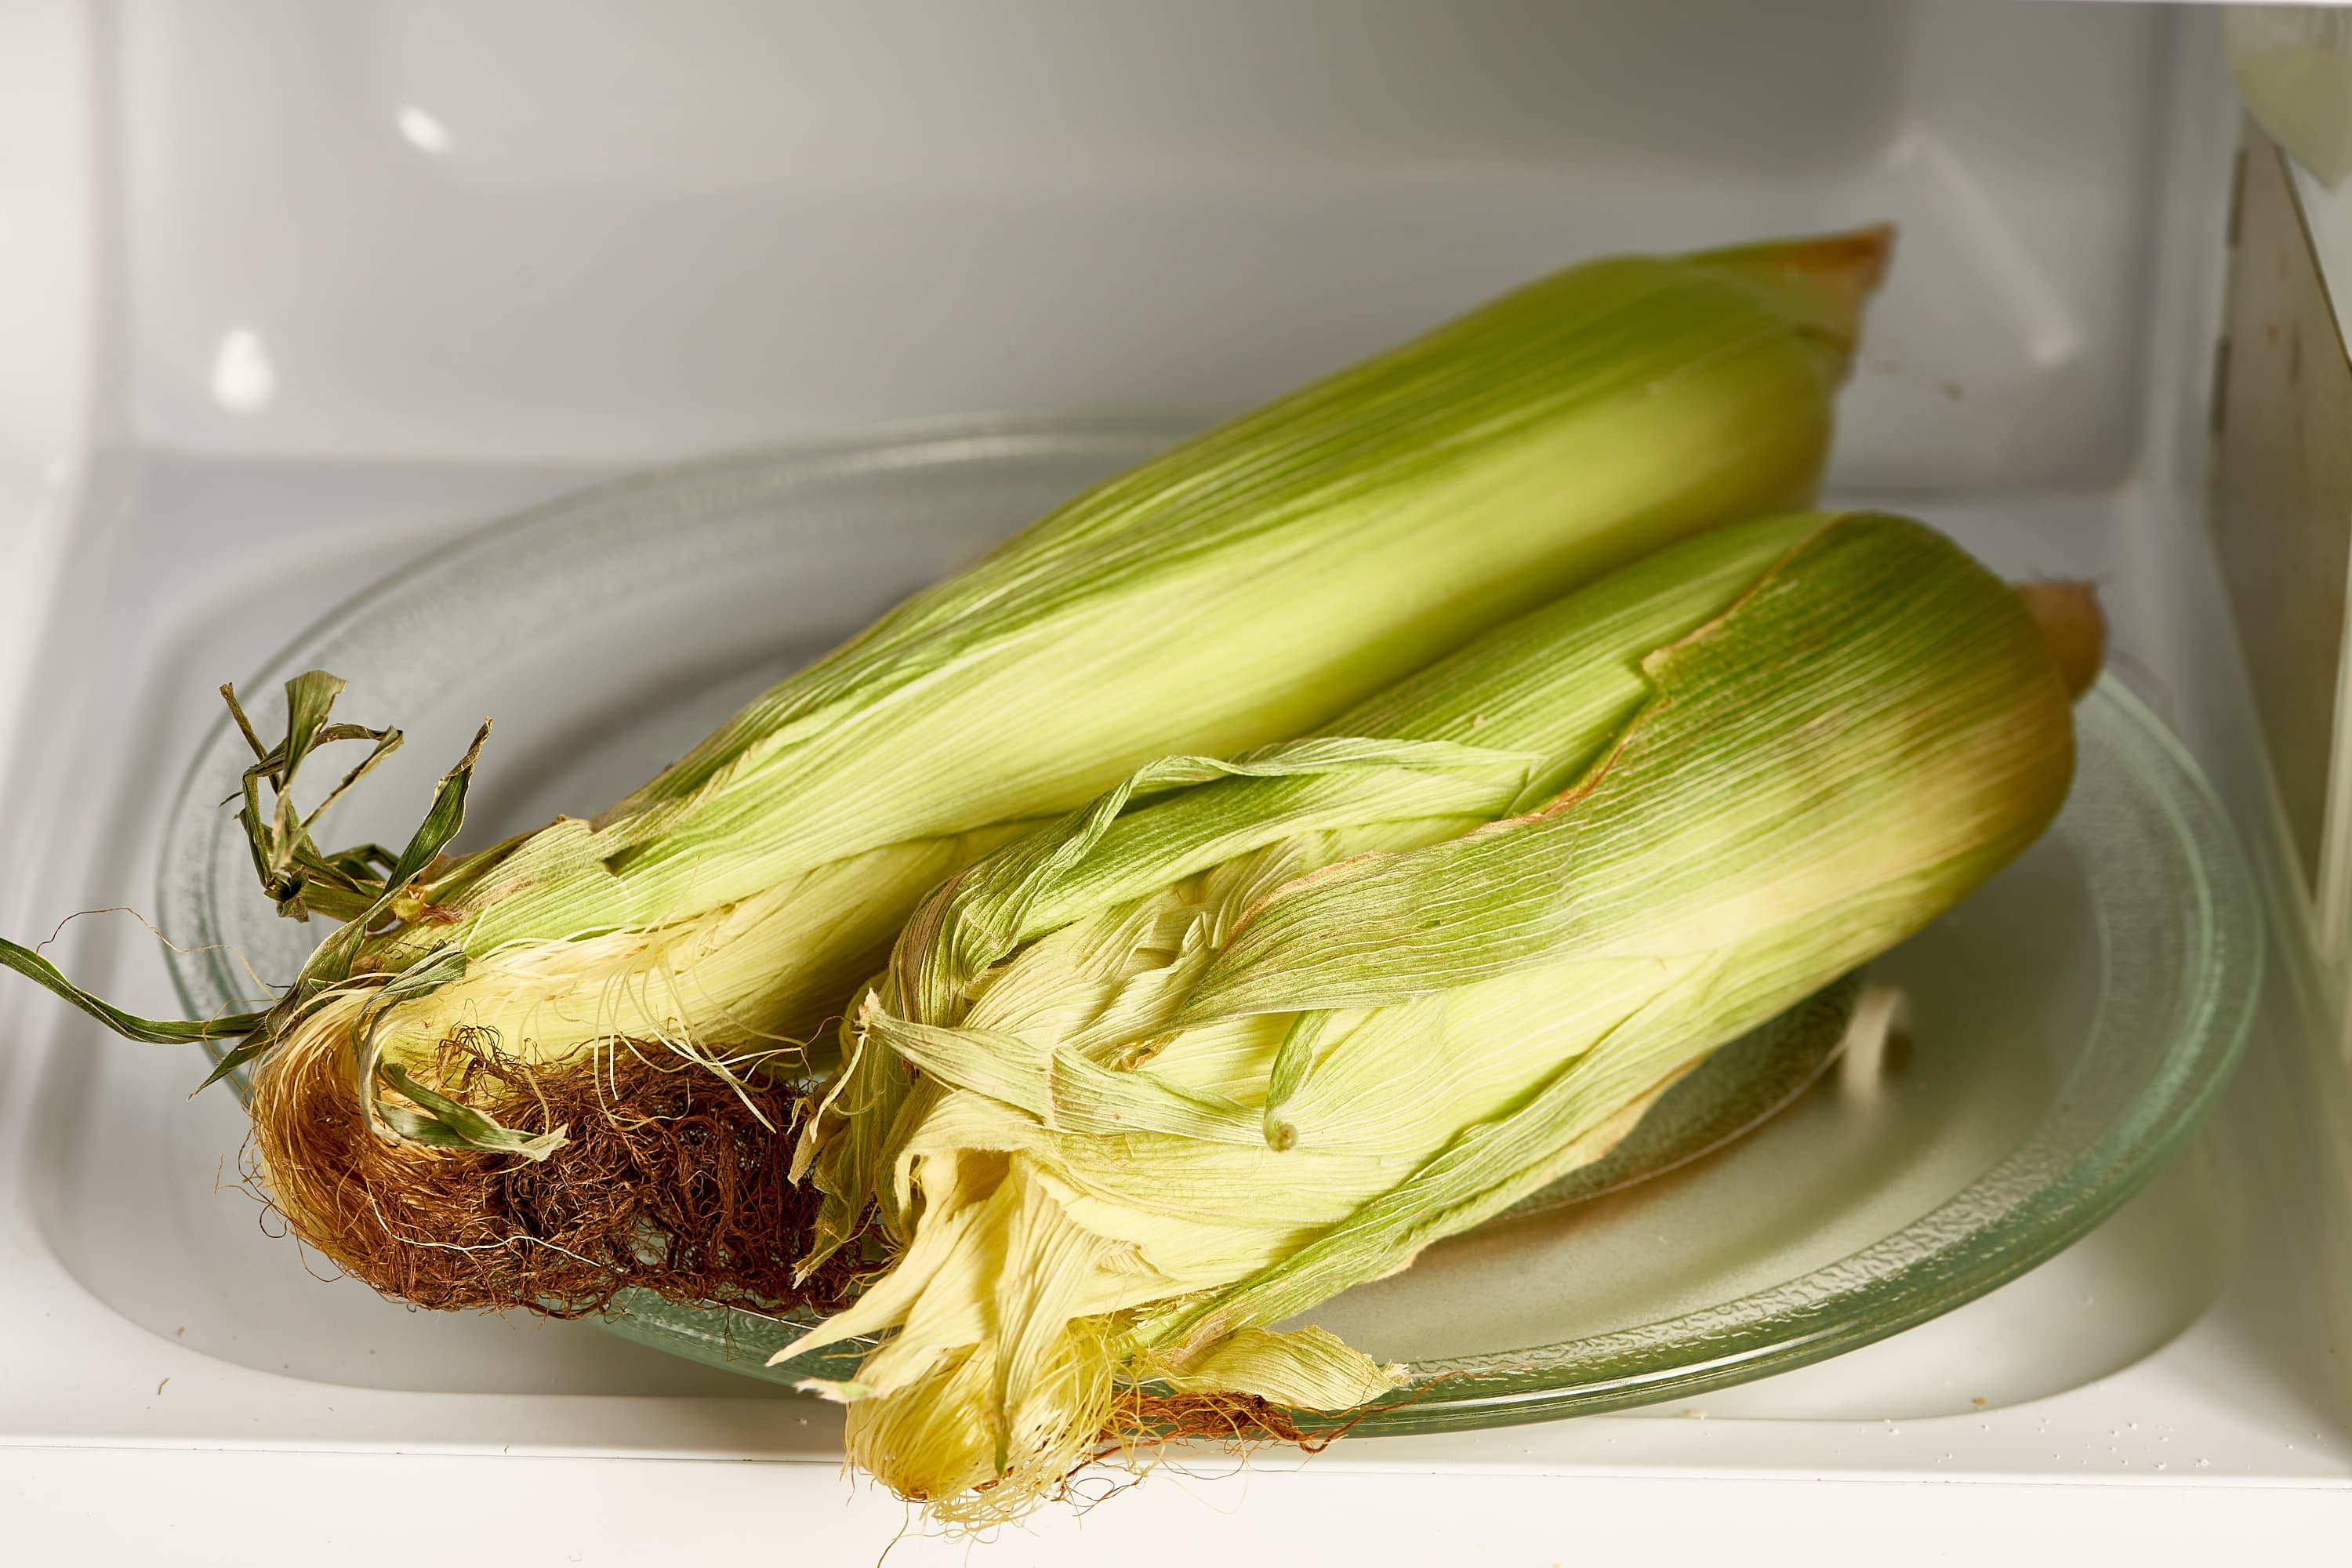 TIP OF THE DAY: Microwave Ears Of Corn, The Nibble Webzine Of Food  Adventures